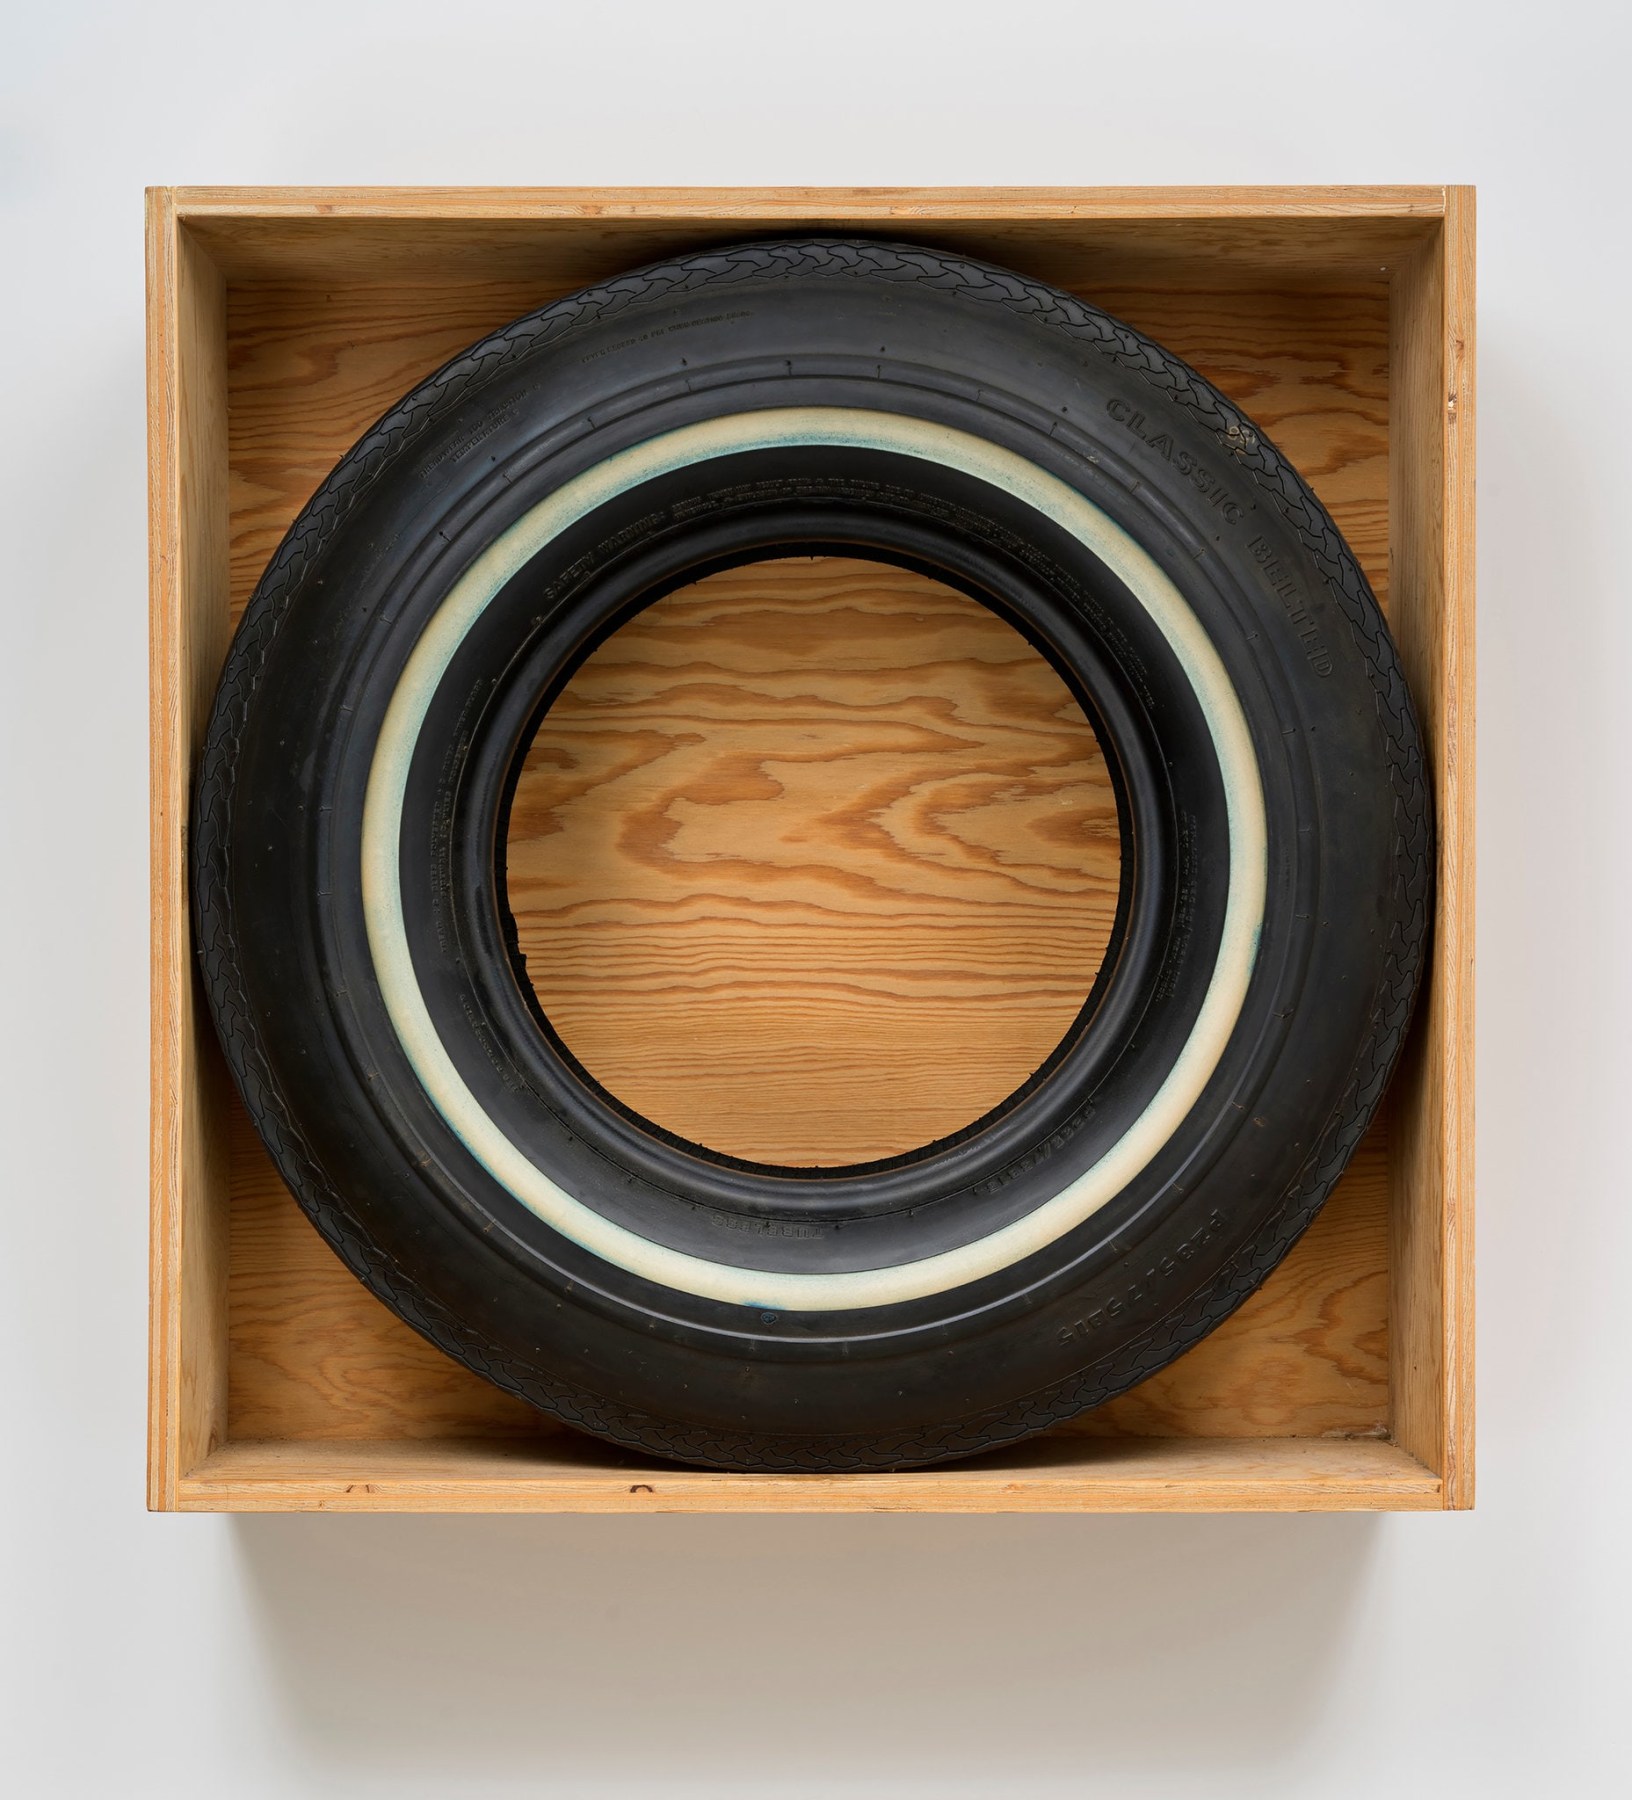 John Dogg&rsquo;s 1986 &ldquo;Untitled (Classic Belted),&rdquo; a round tire circumscribed by a square box. via Venus Over Manhattan